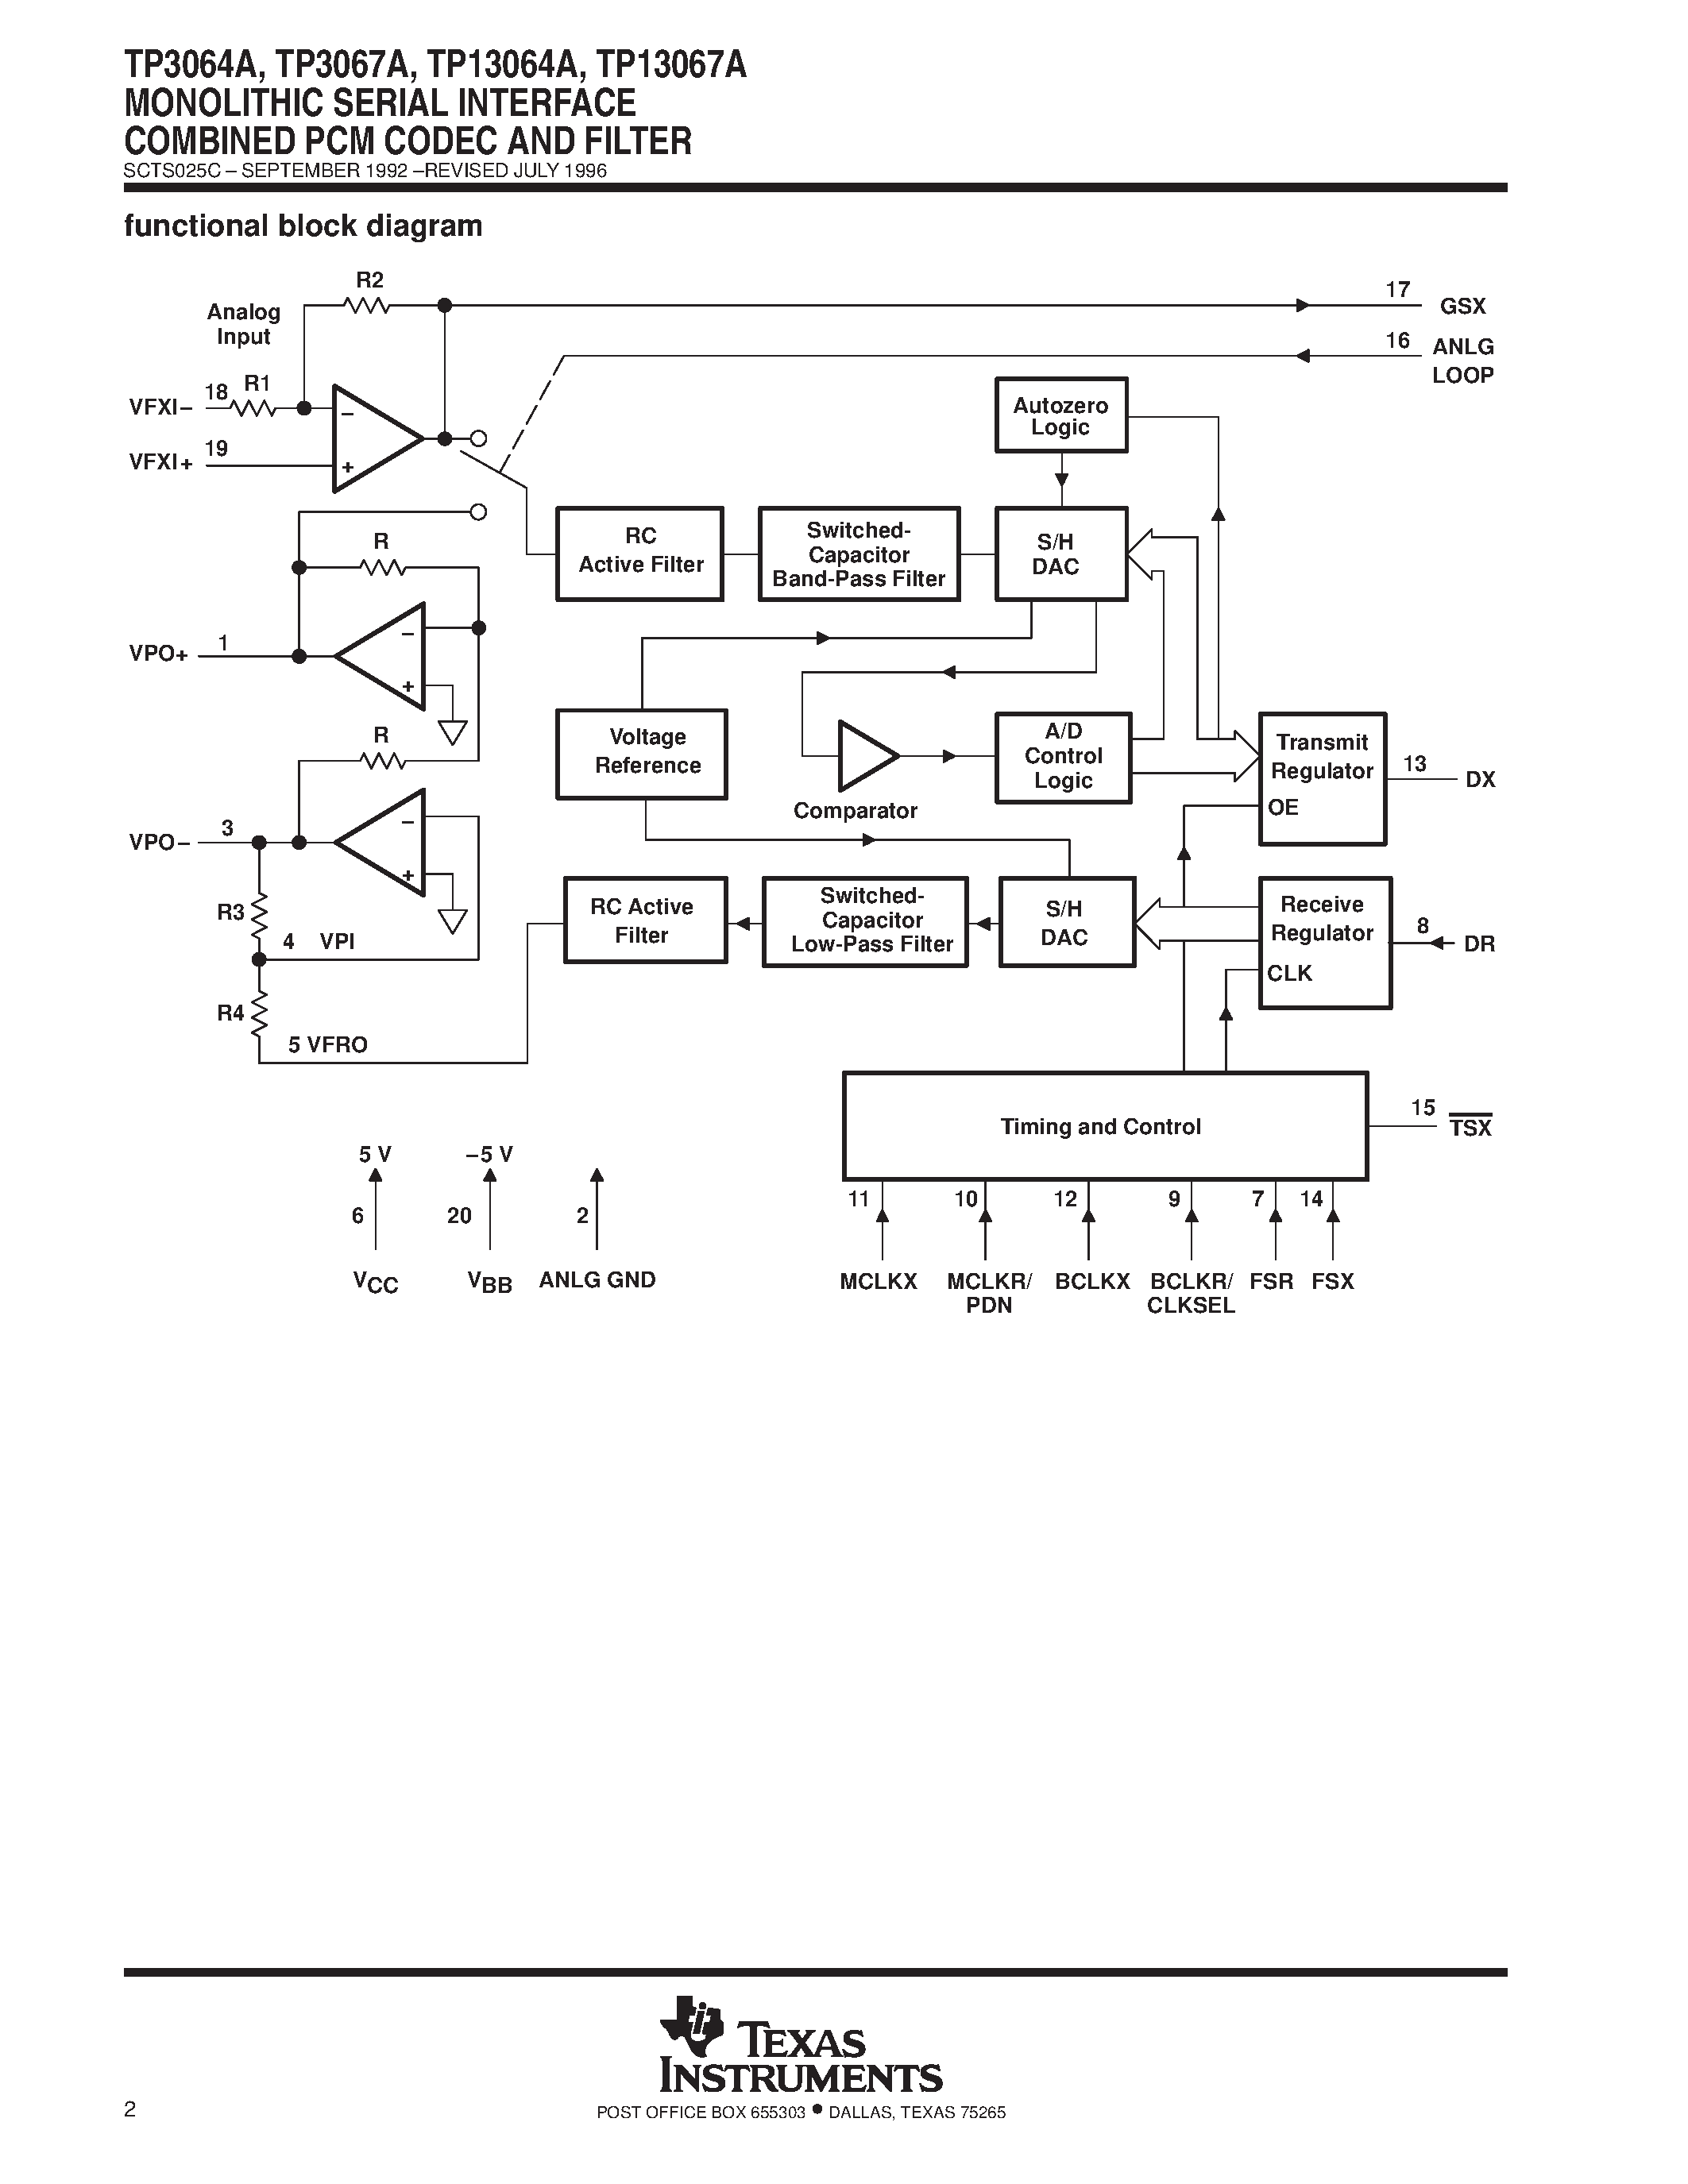 Datasheet TP13064ADW - MONOLITHIC SERIAL INTERFACE COMBINED PCM CODEC AND FILTER page 2